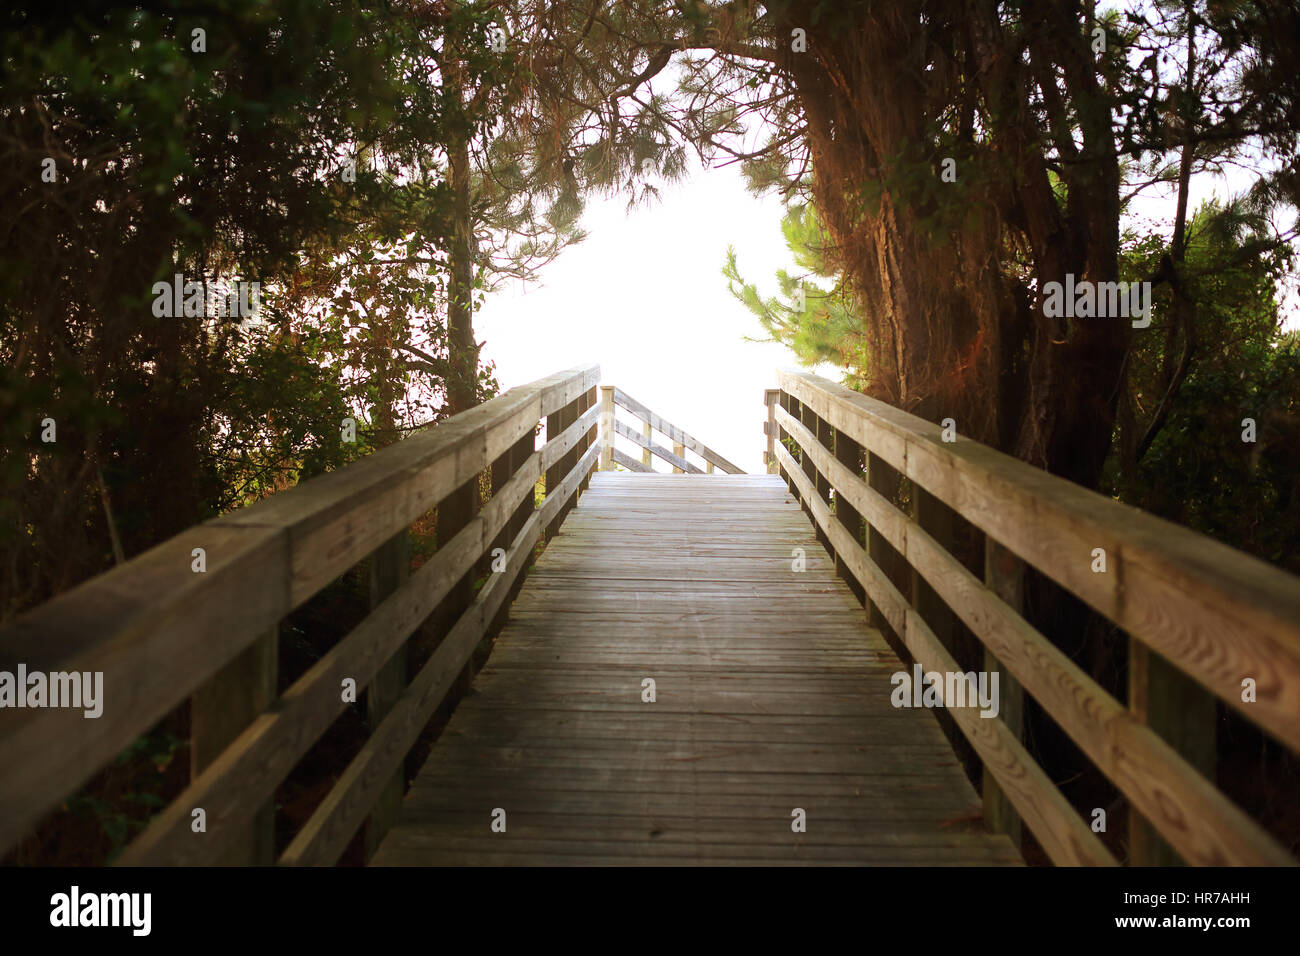 A wooden boardwalk leads through pine trees and vines to the beach at Kiawah Island, South Carolina. Stock Photo